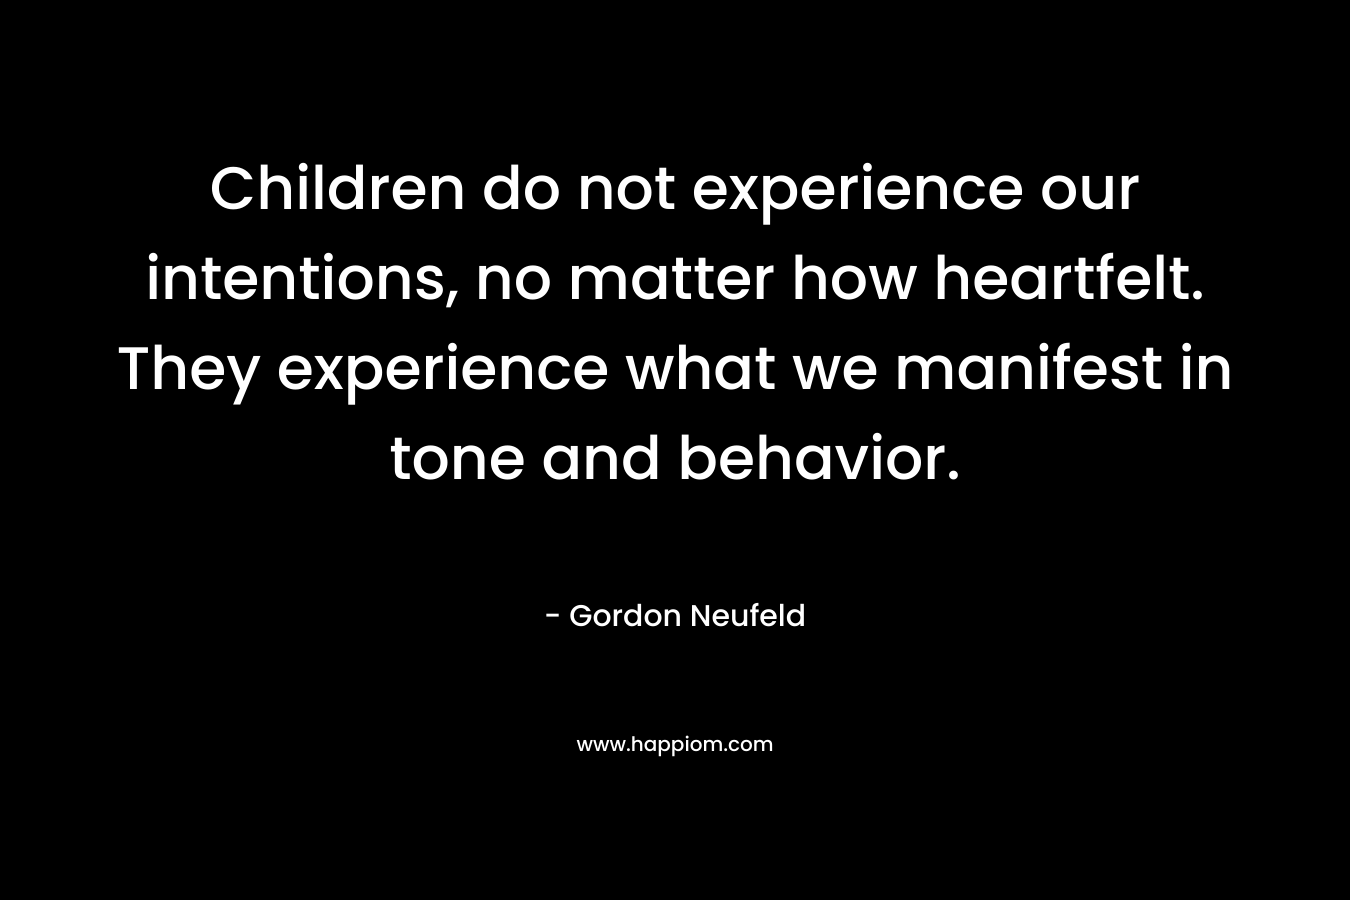 Children do not experience our intentions, no matter how heartfelt. They experience what we manifest in tone and behavior. – Gordon Neufeld